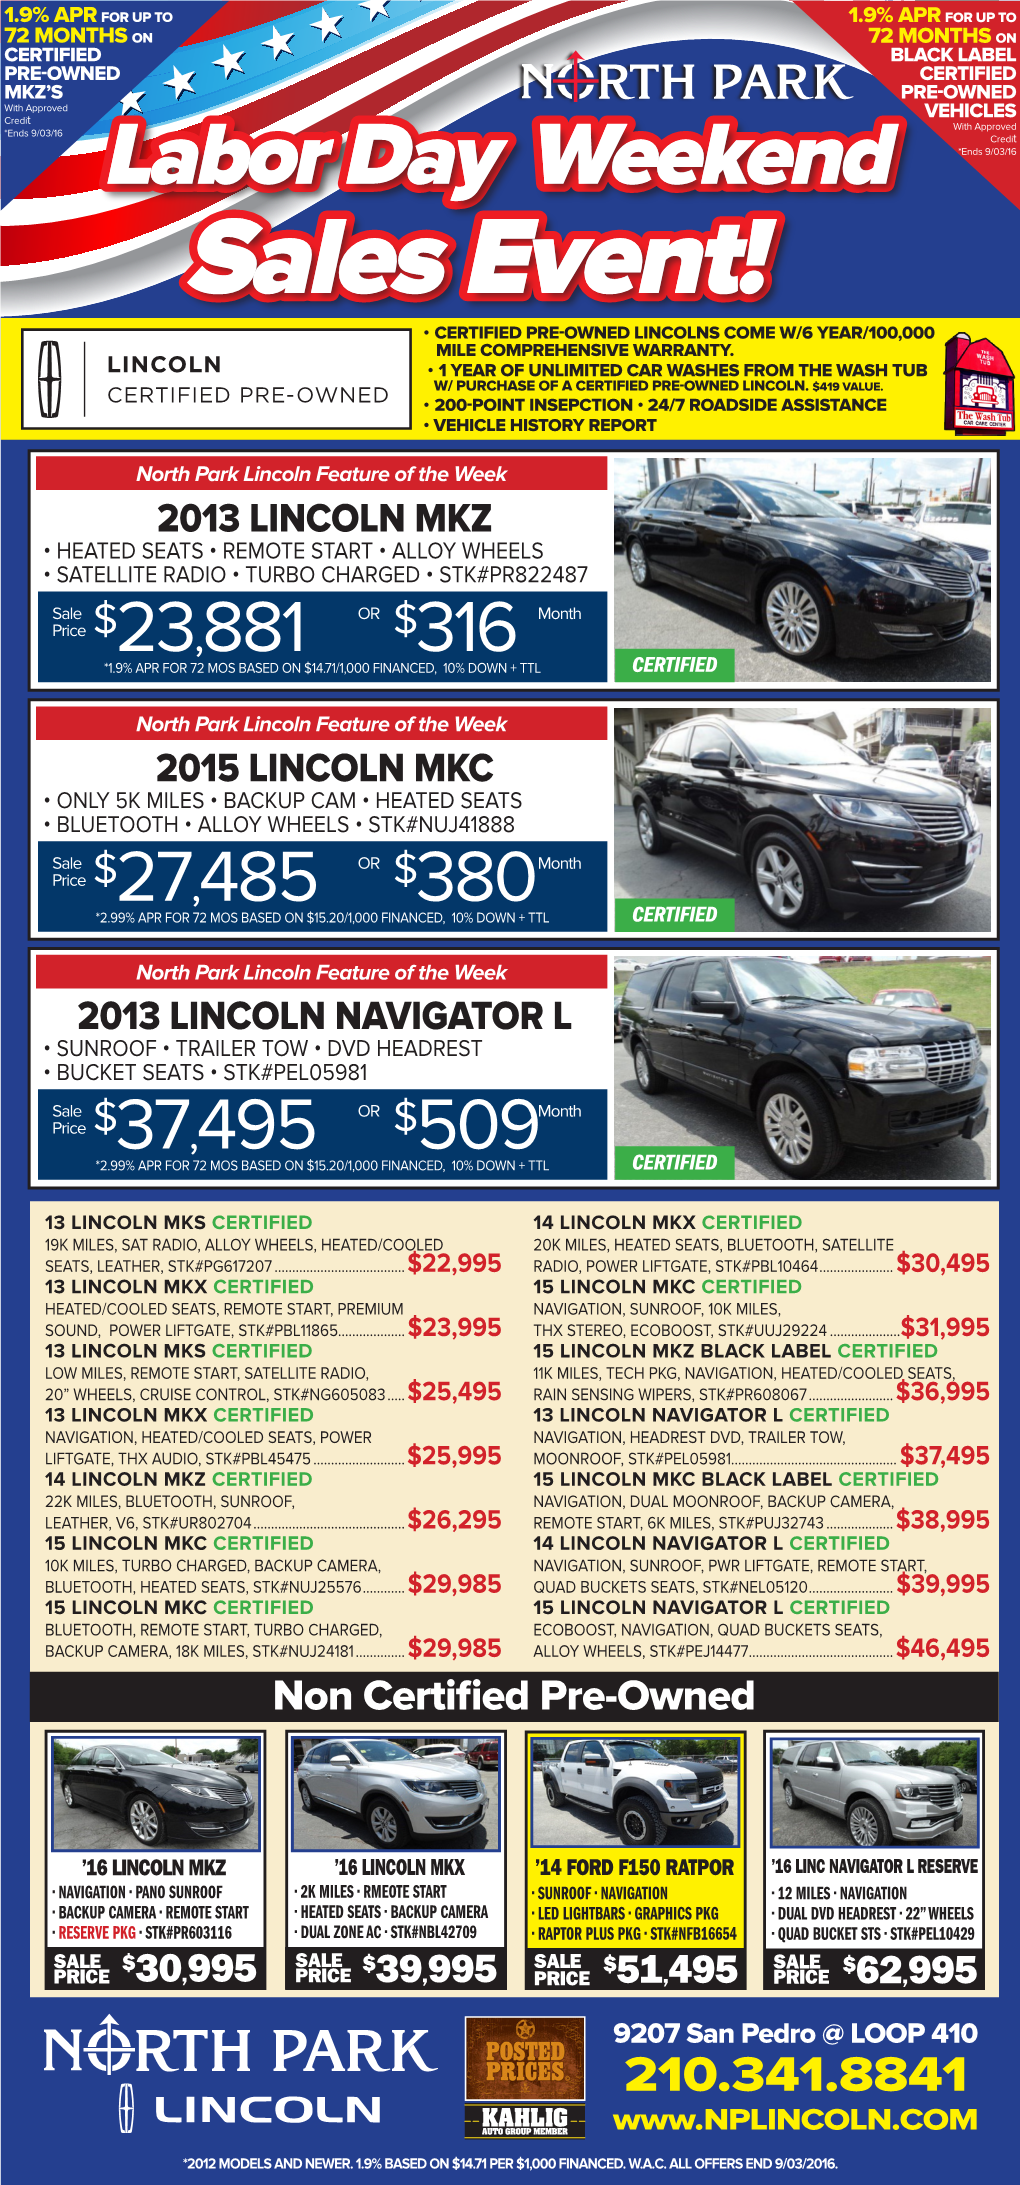 Sales Event! • CERTIFIED PRE-OWNED LINCOLNS COME W/6 YEAR/100,000 MILE COMPREHENSIVE WARRANTY